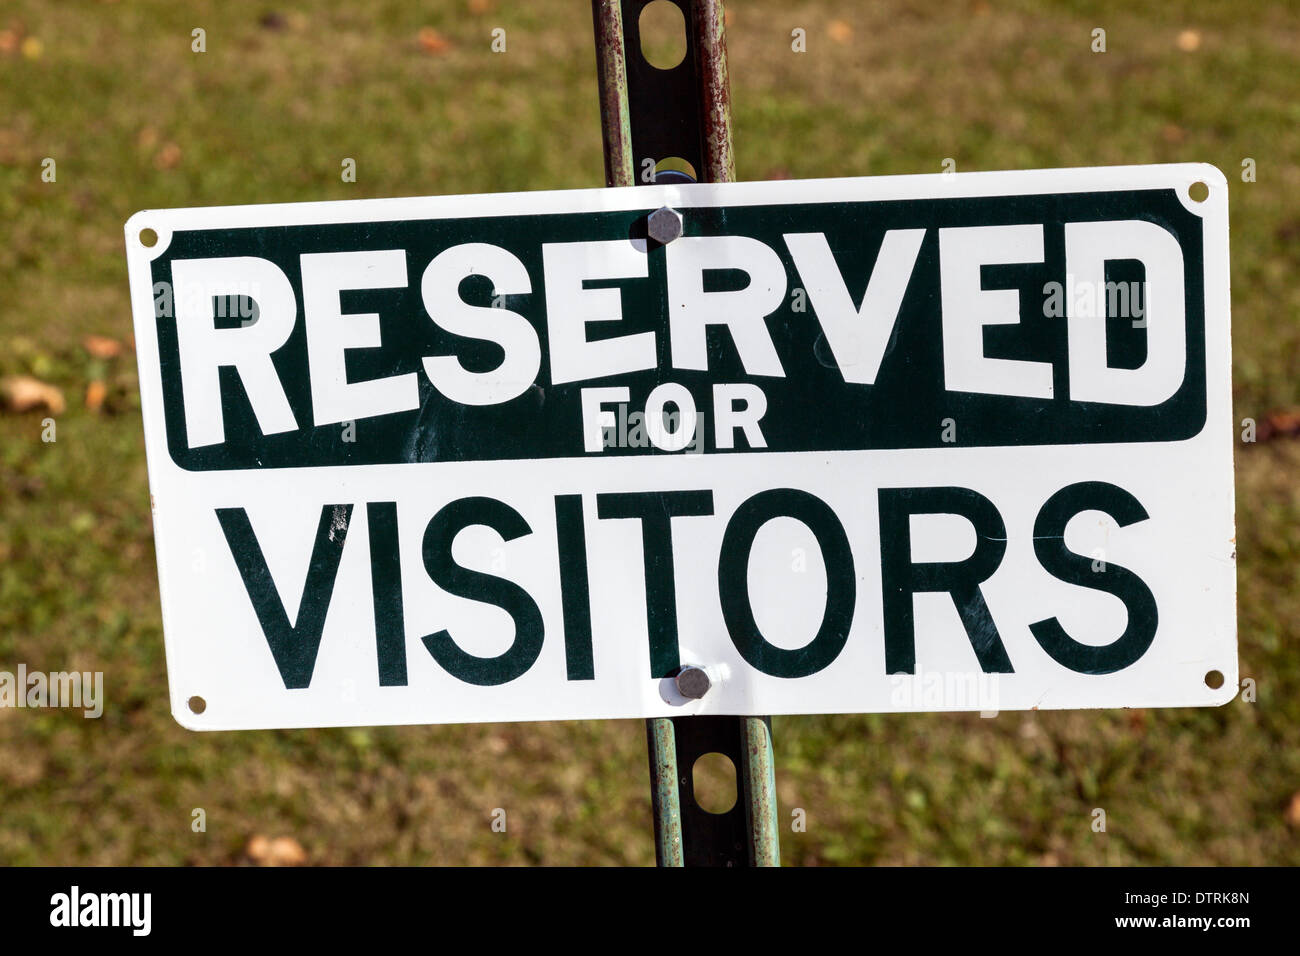 Reserved for visitors - sign seen by the landmark Stock Photo